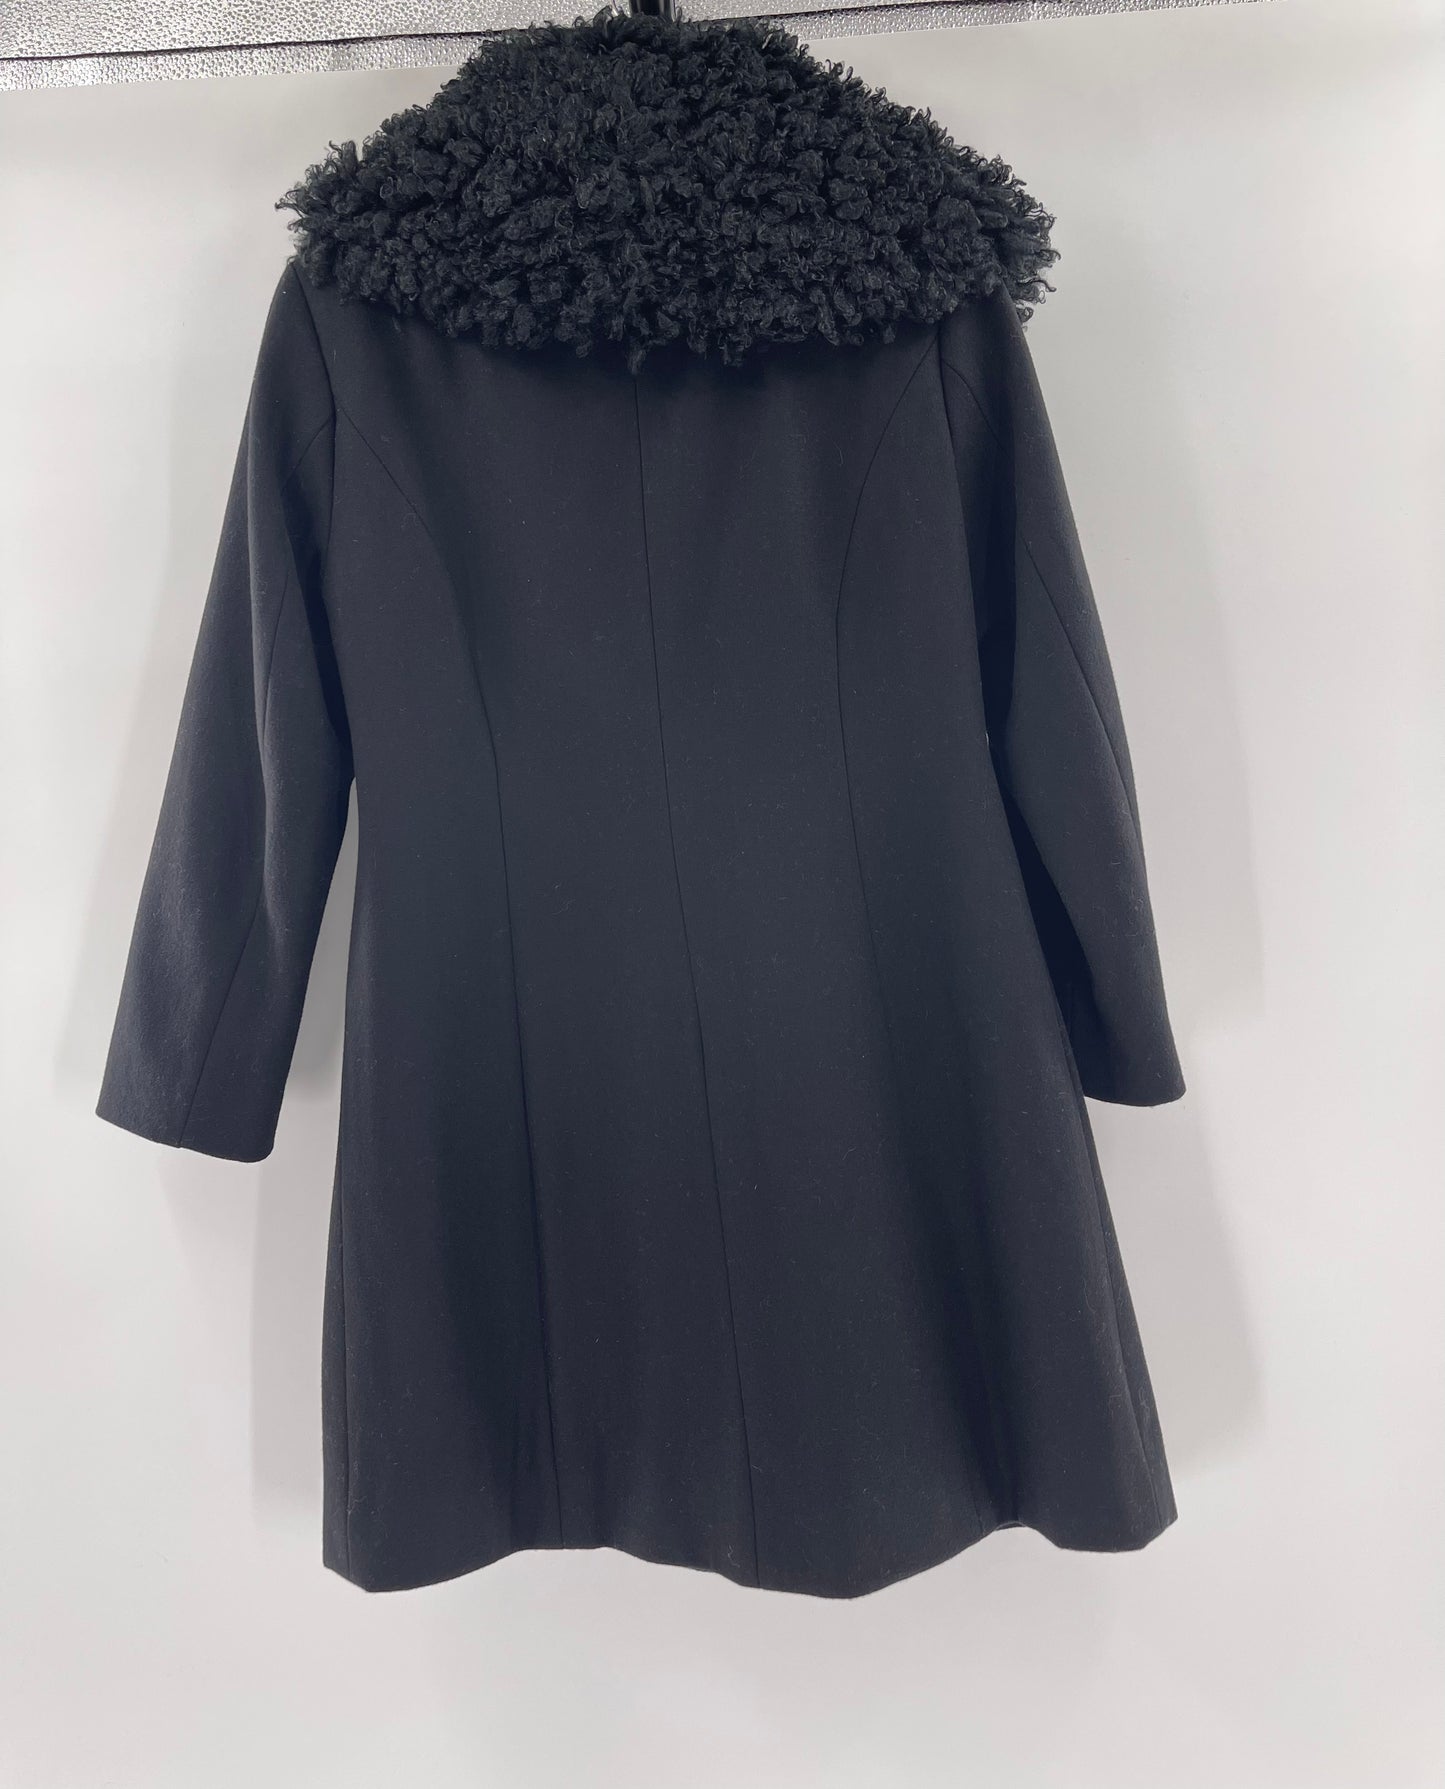 Laundry By Shelli Segal Black Wool Coat With Faux Fur Trimming (Size 8)